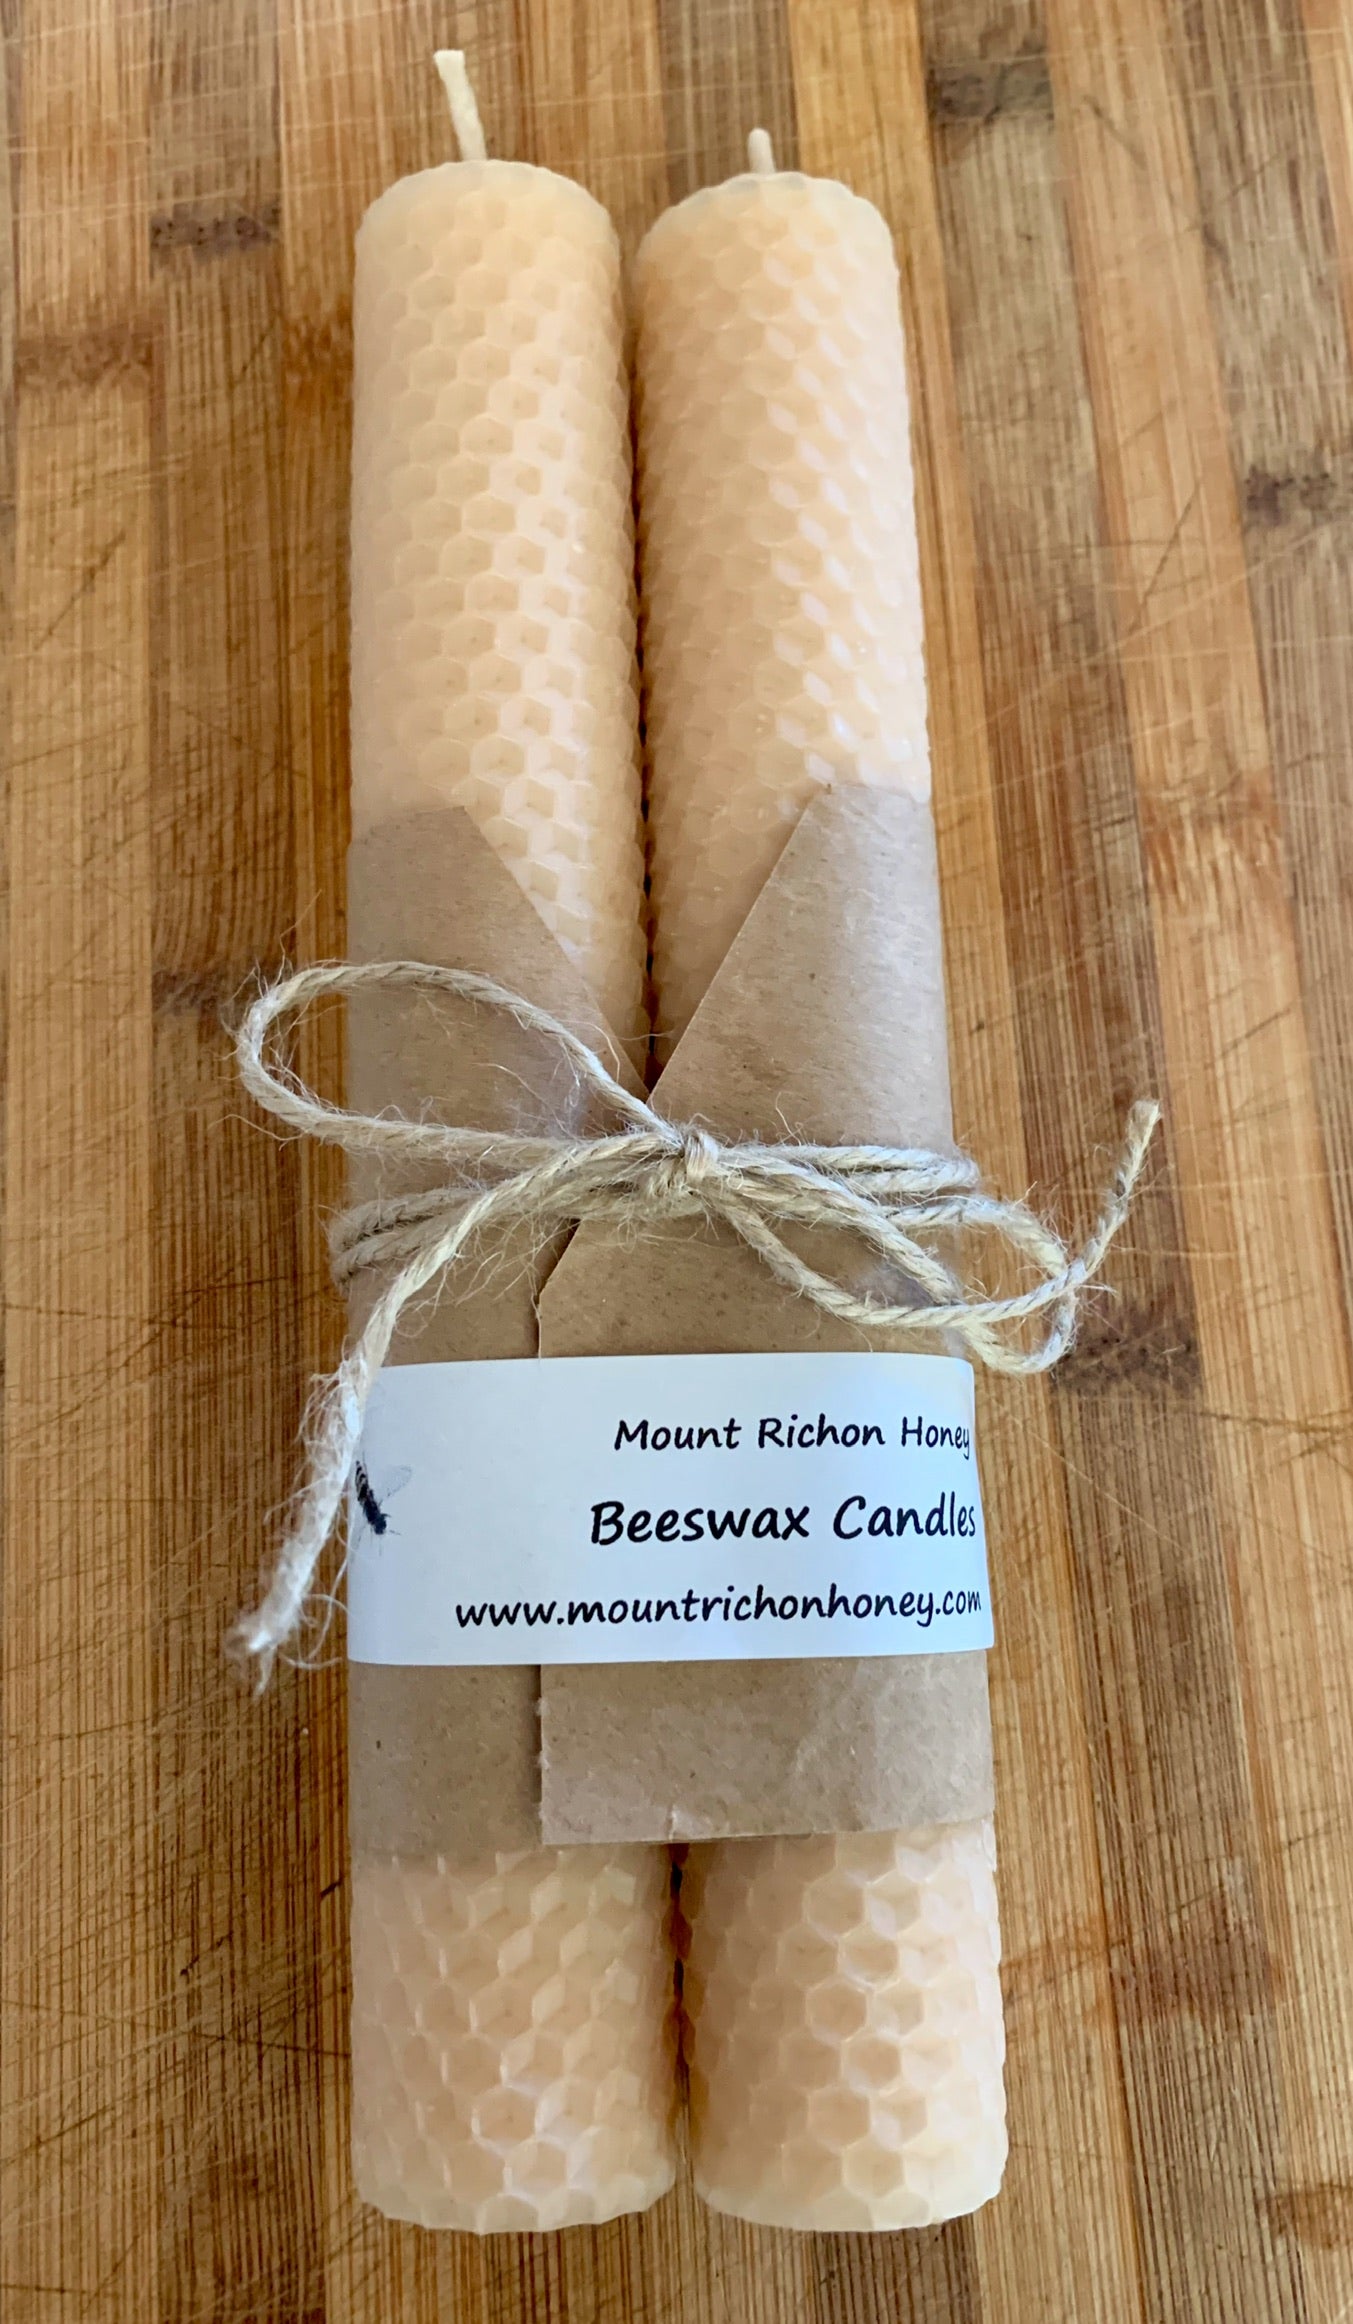 Western Australian made Beeswax Rolled Candles